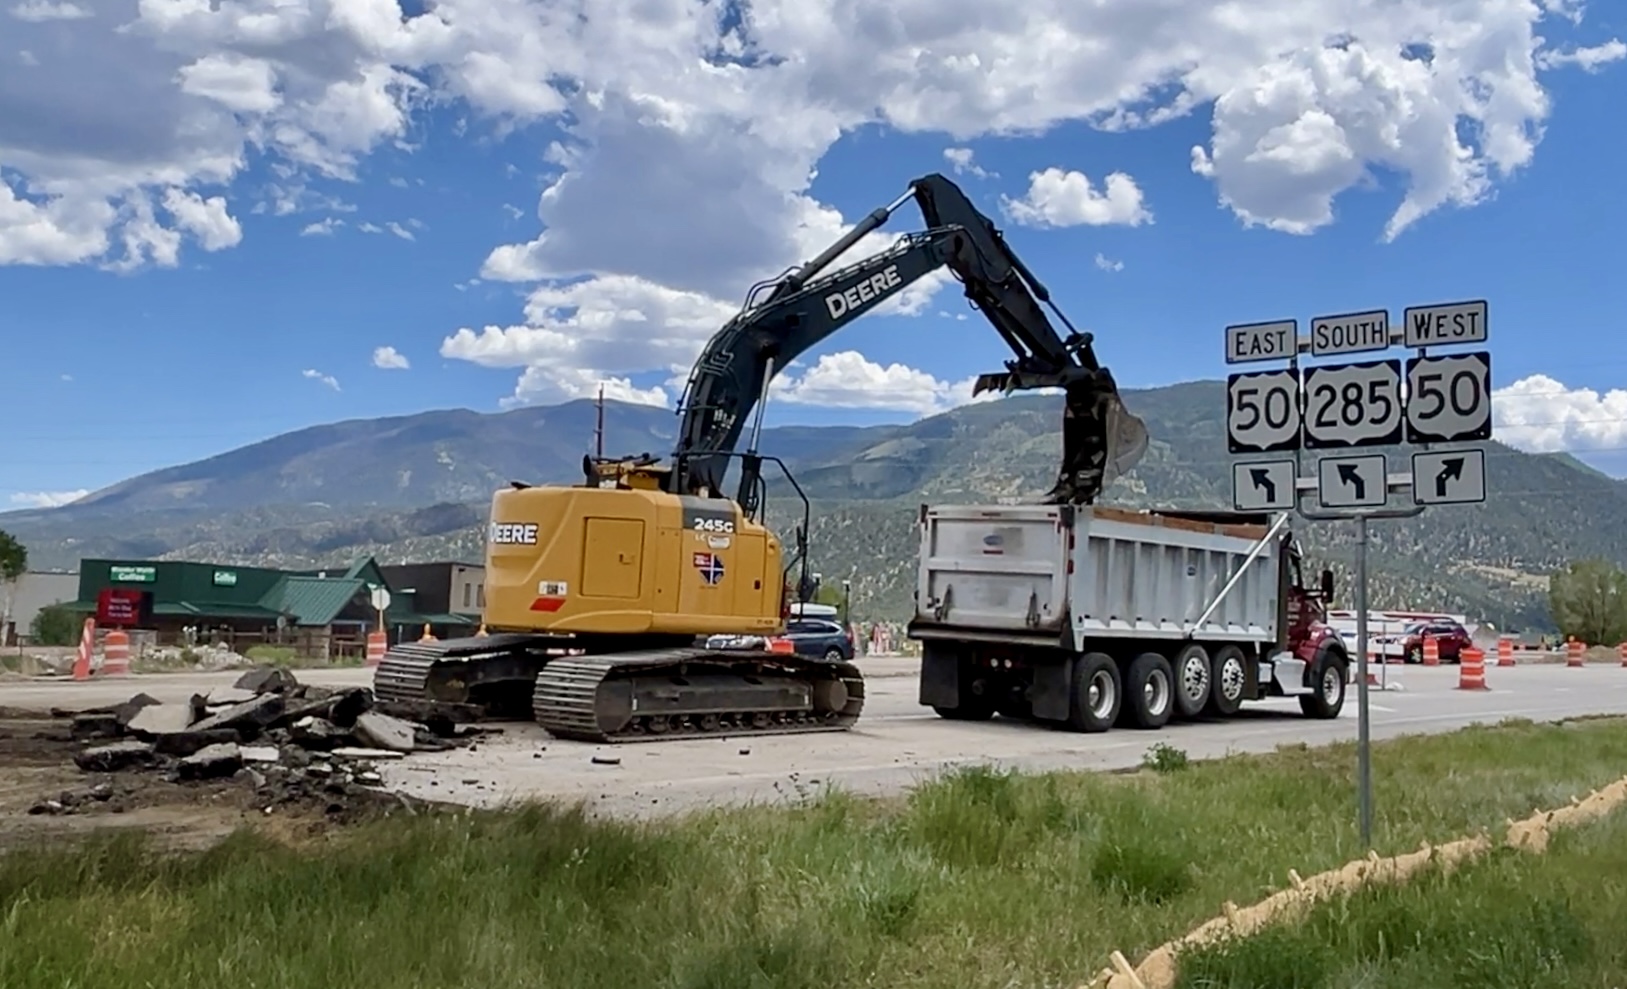 US 285 Intersection Pavement Removal.jpg detail image